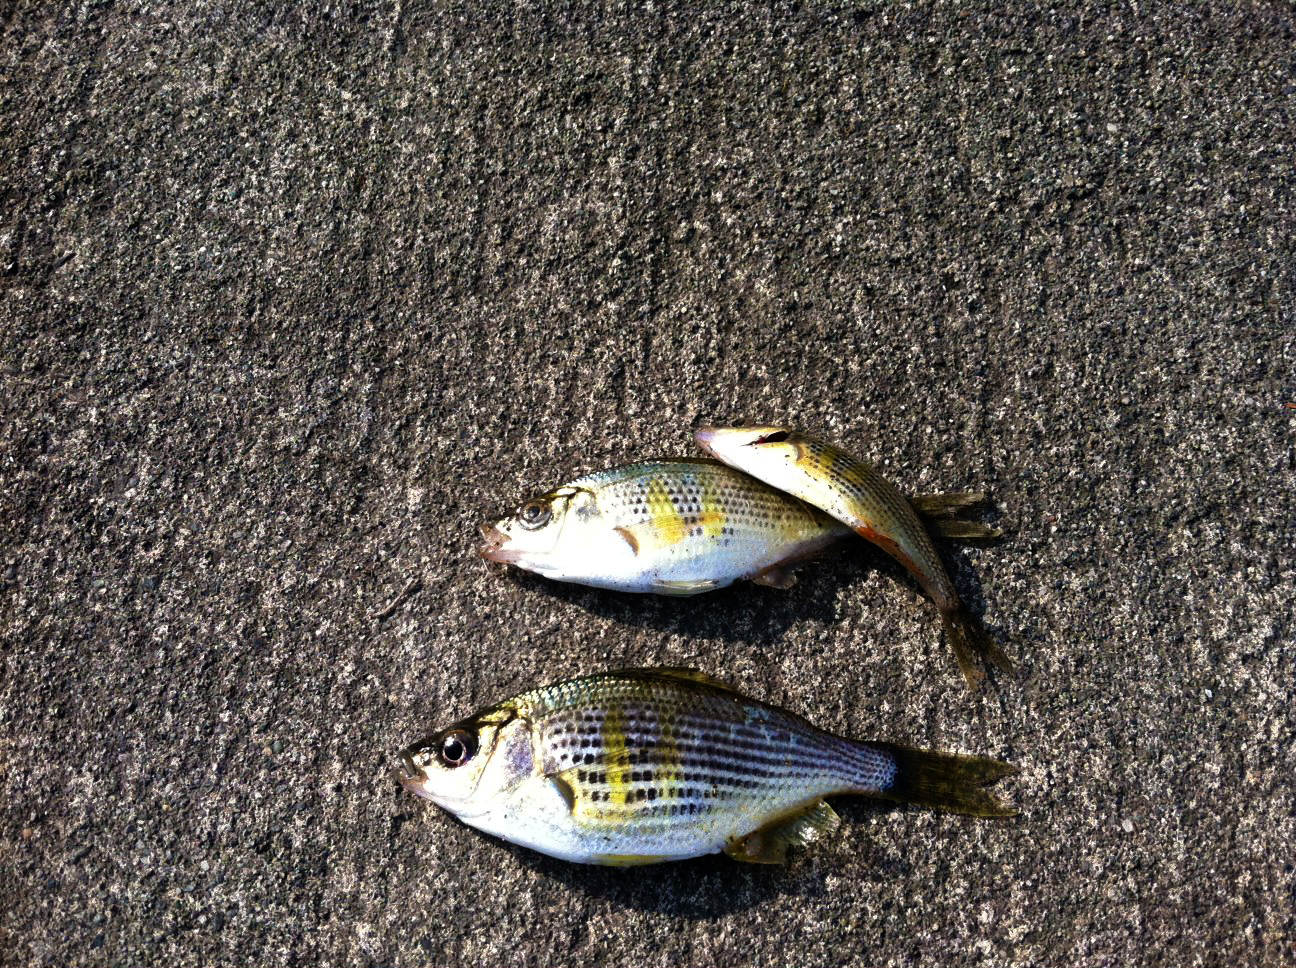 Perch caught off the fishing pier at T-105 Park.